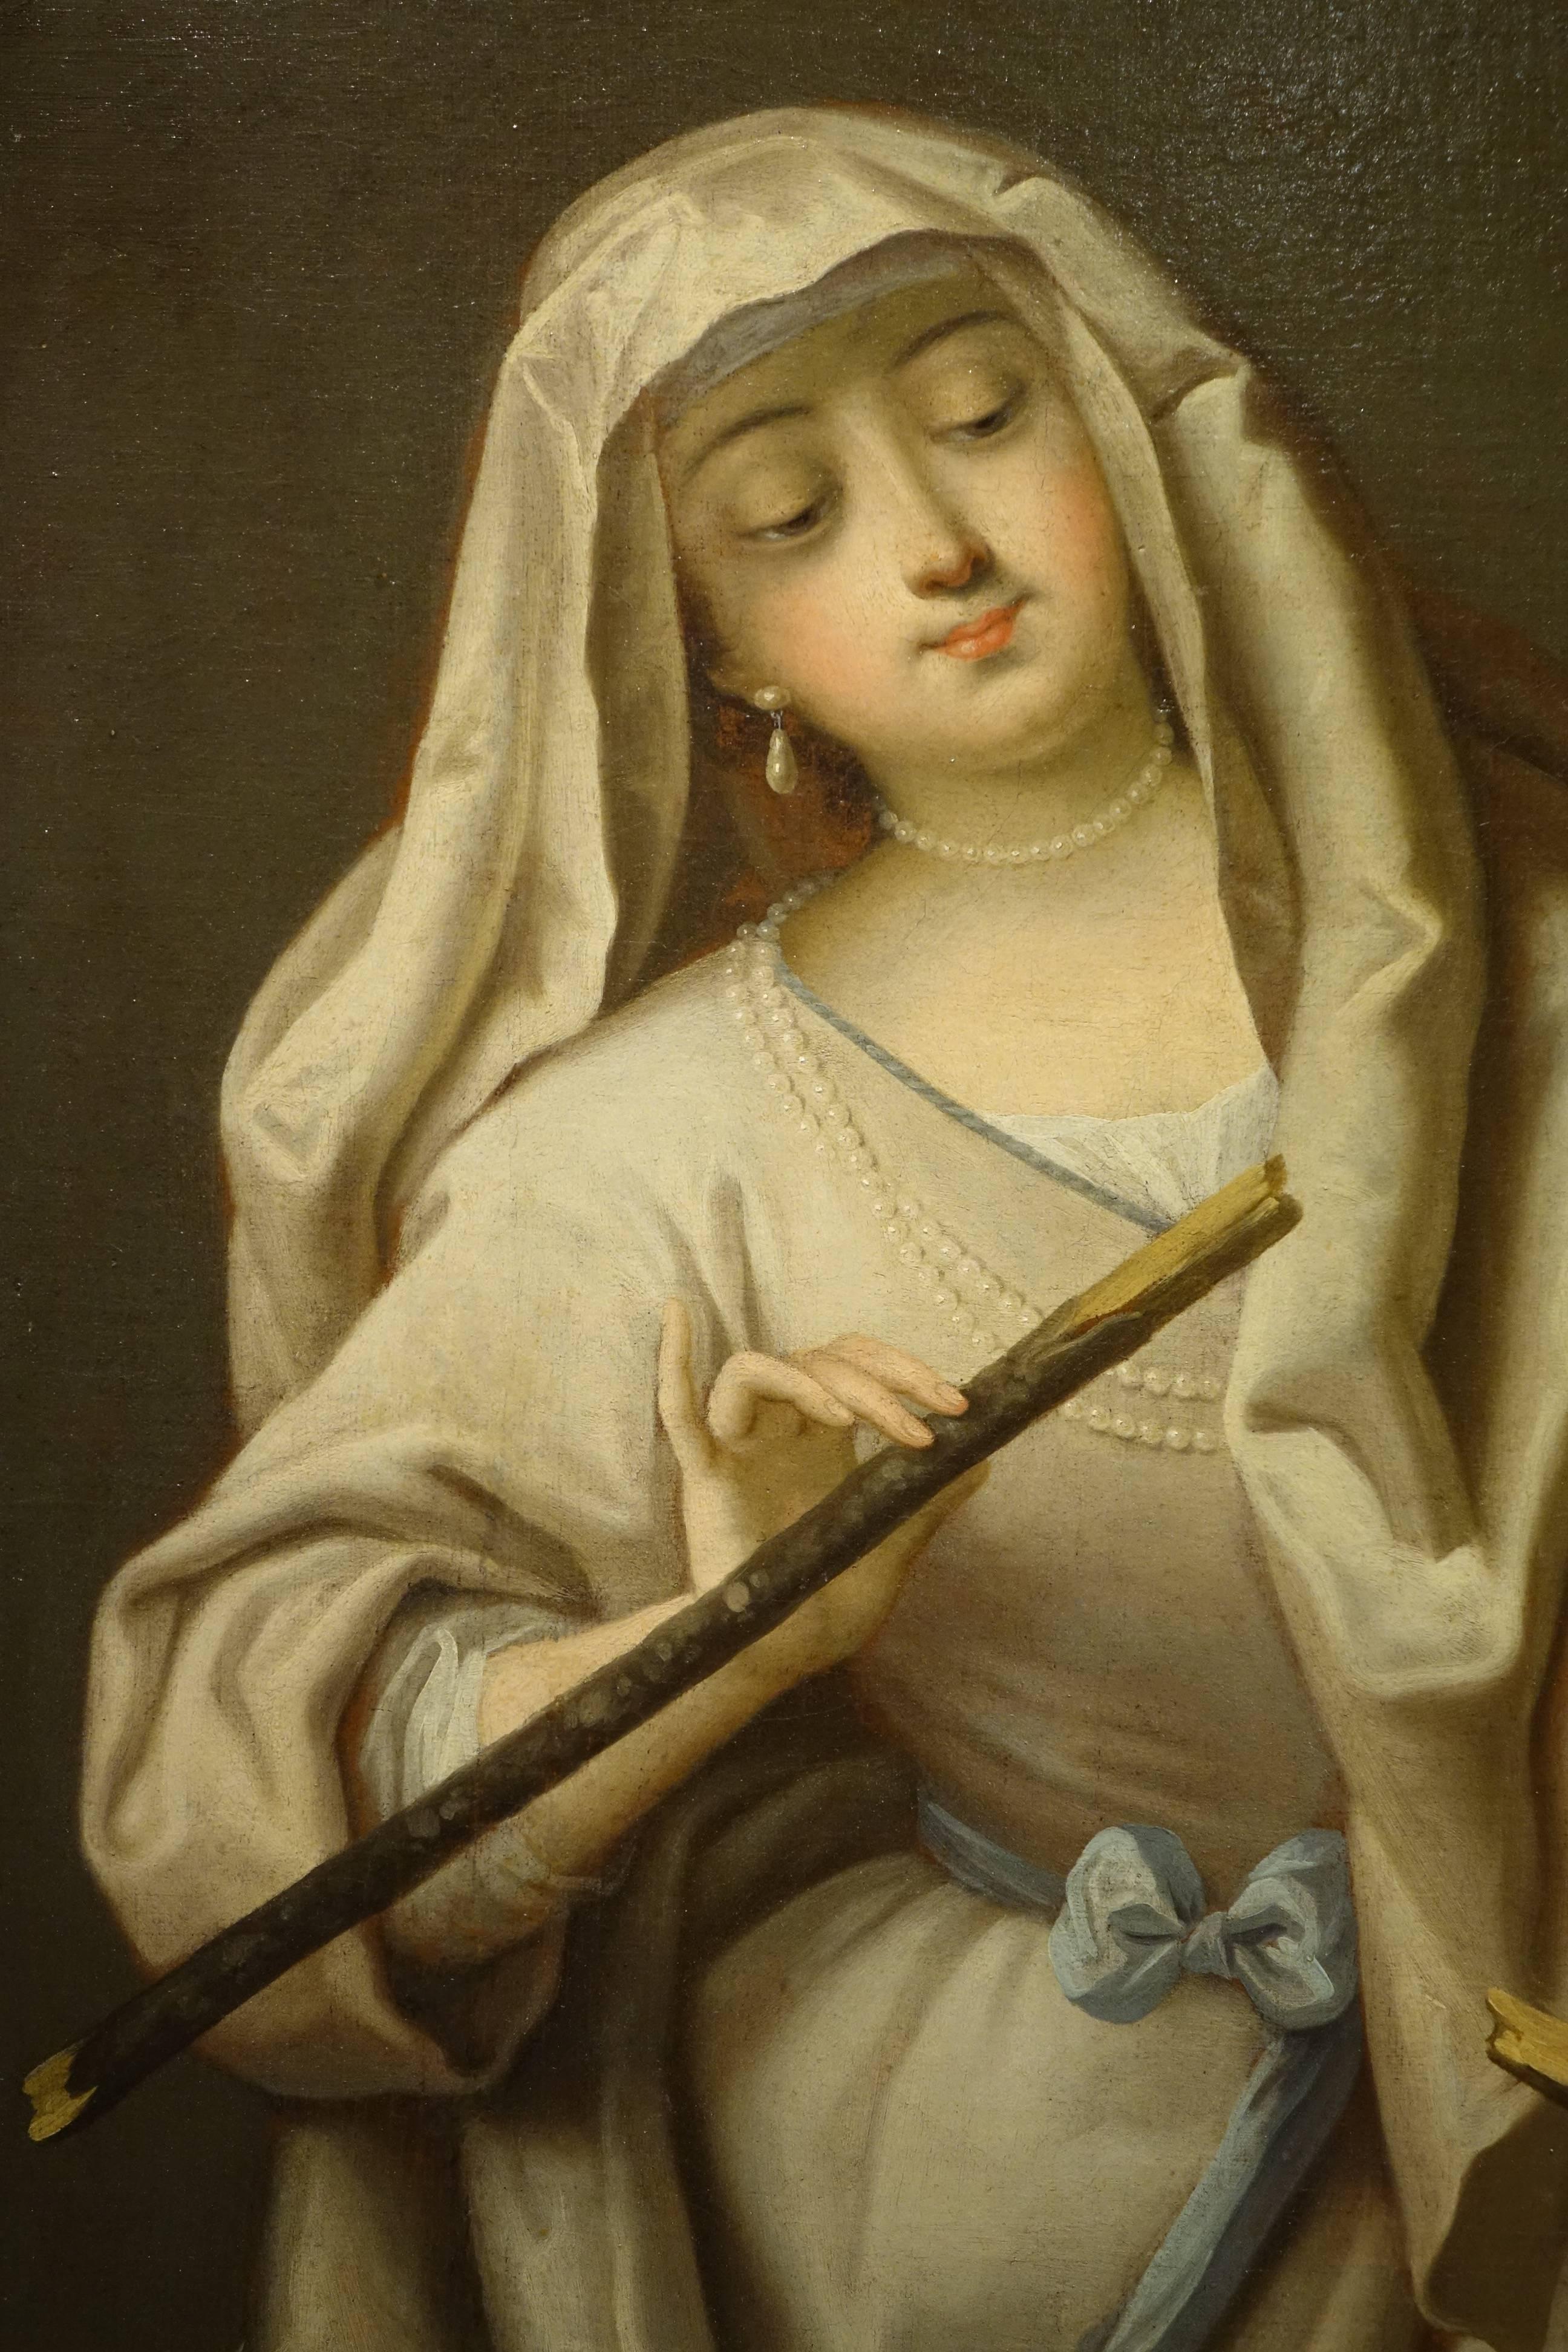 Portrait of a young woman as a vestal virgin keeping the sacred fire.
French school, circa 1720 , follower of Jean Raoux. 
19th century giltwood painted frame.
Canvas relined.
It appears that portraying women royalty and noble women as Vestal